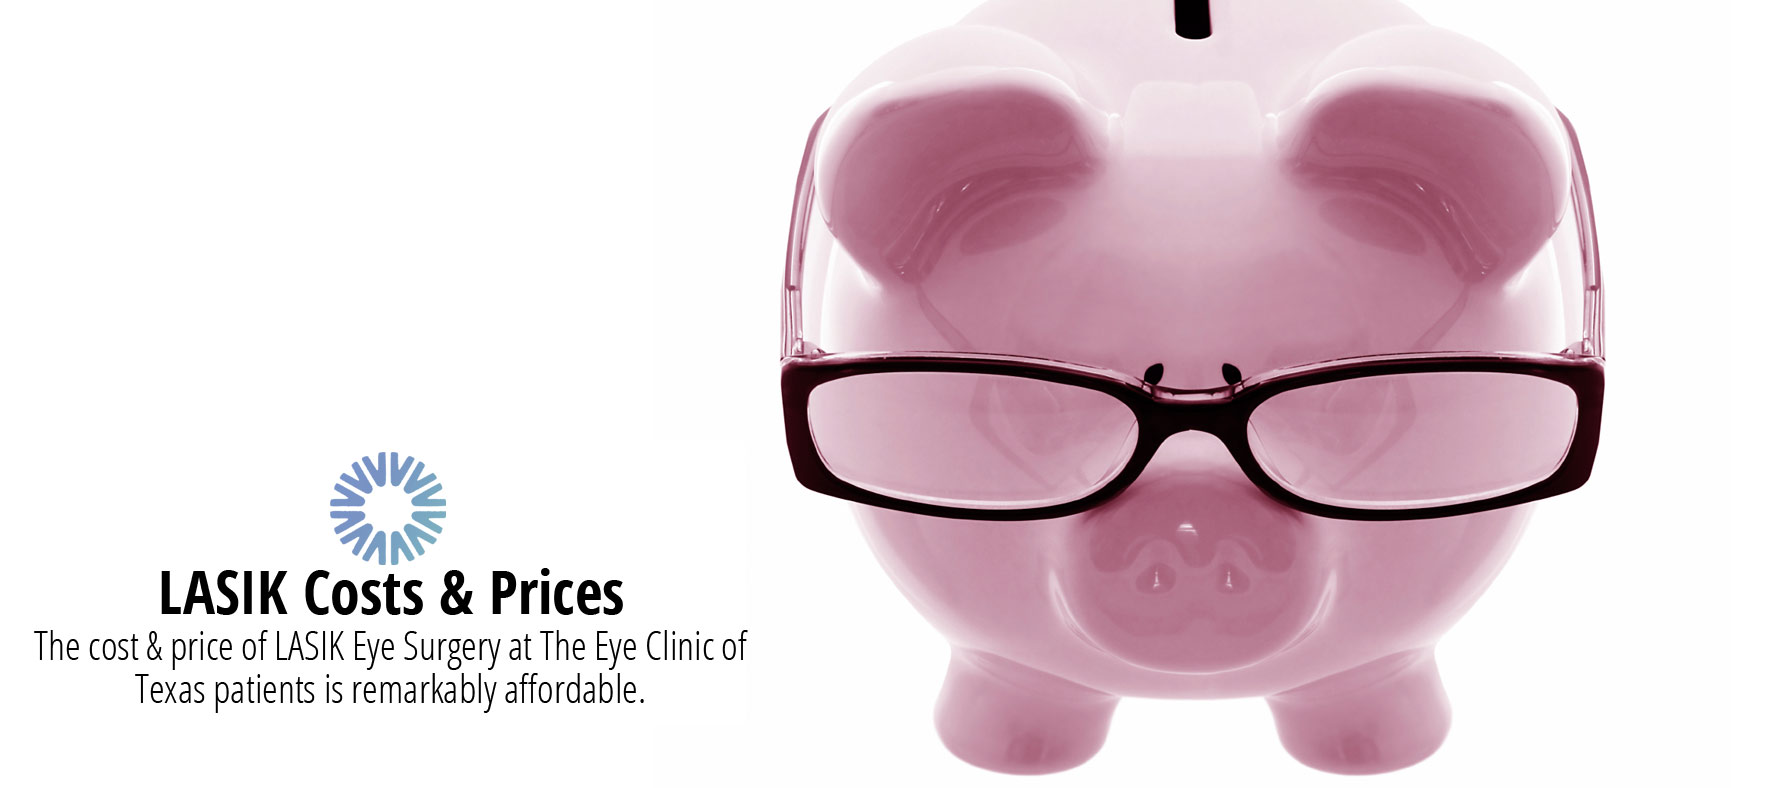 LASIK Cots & Prices Header Image